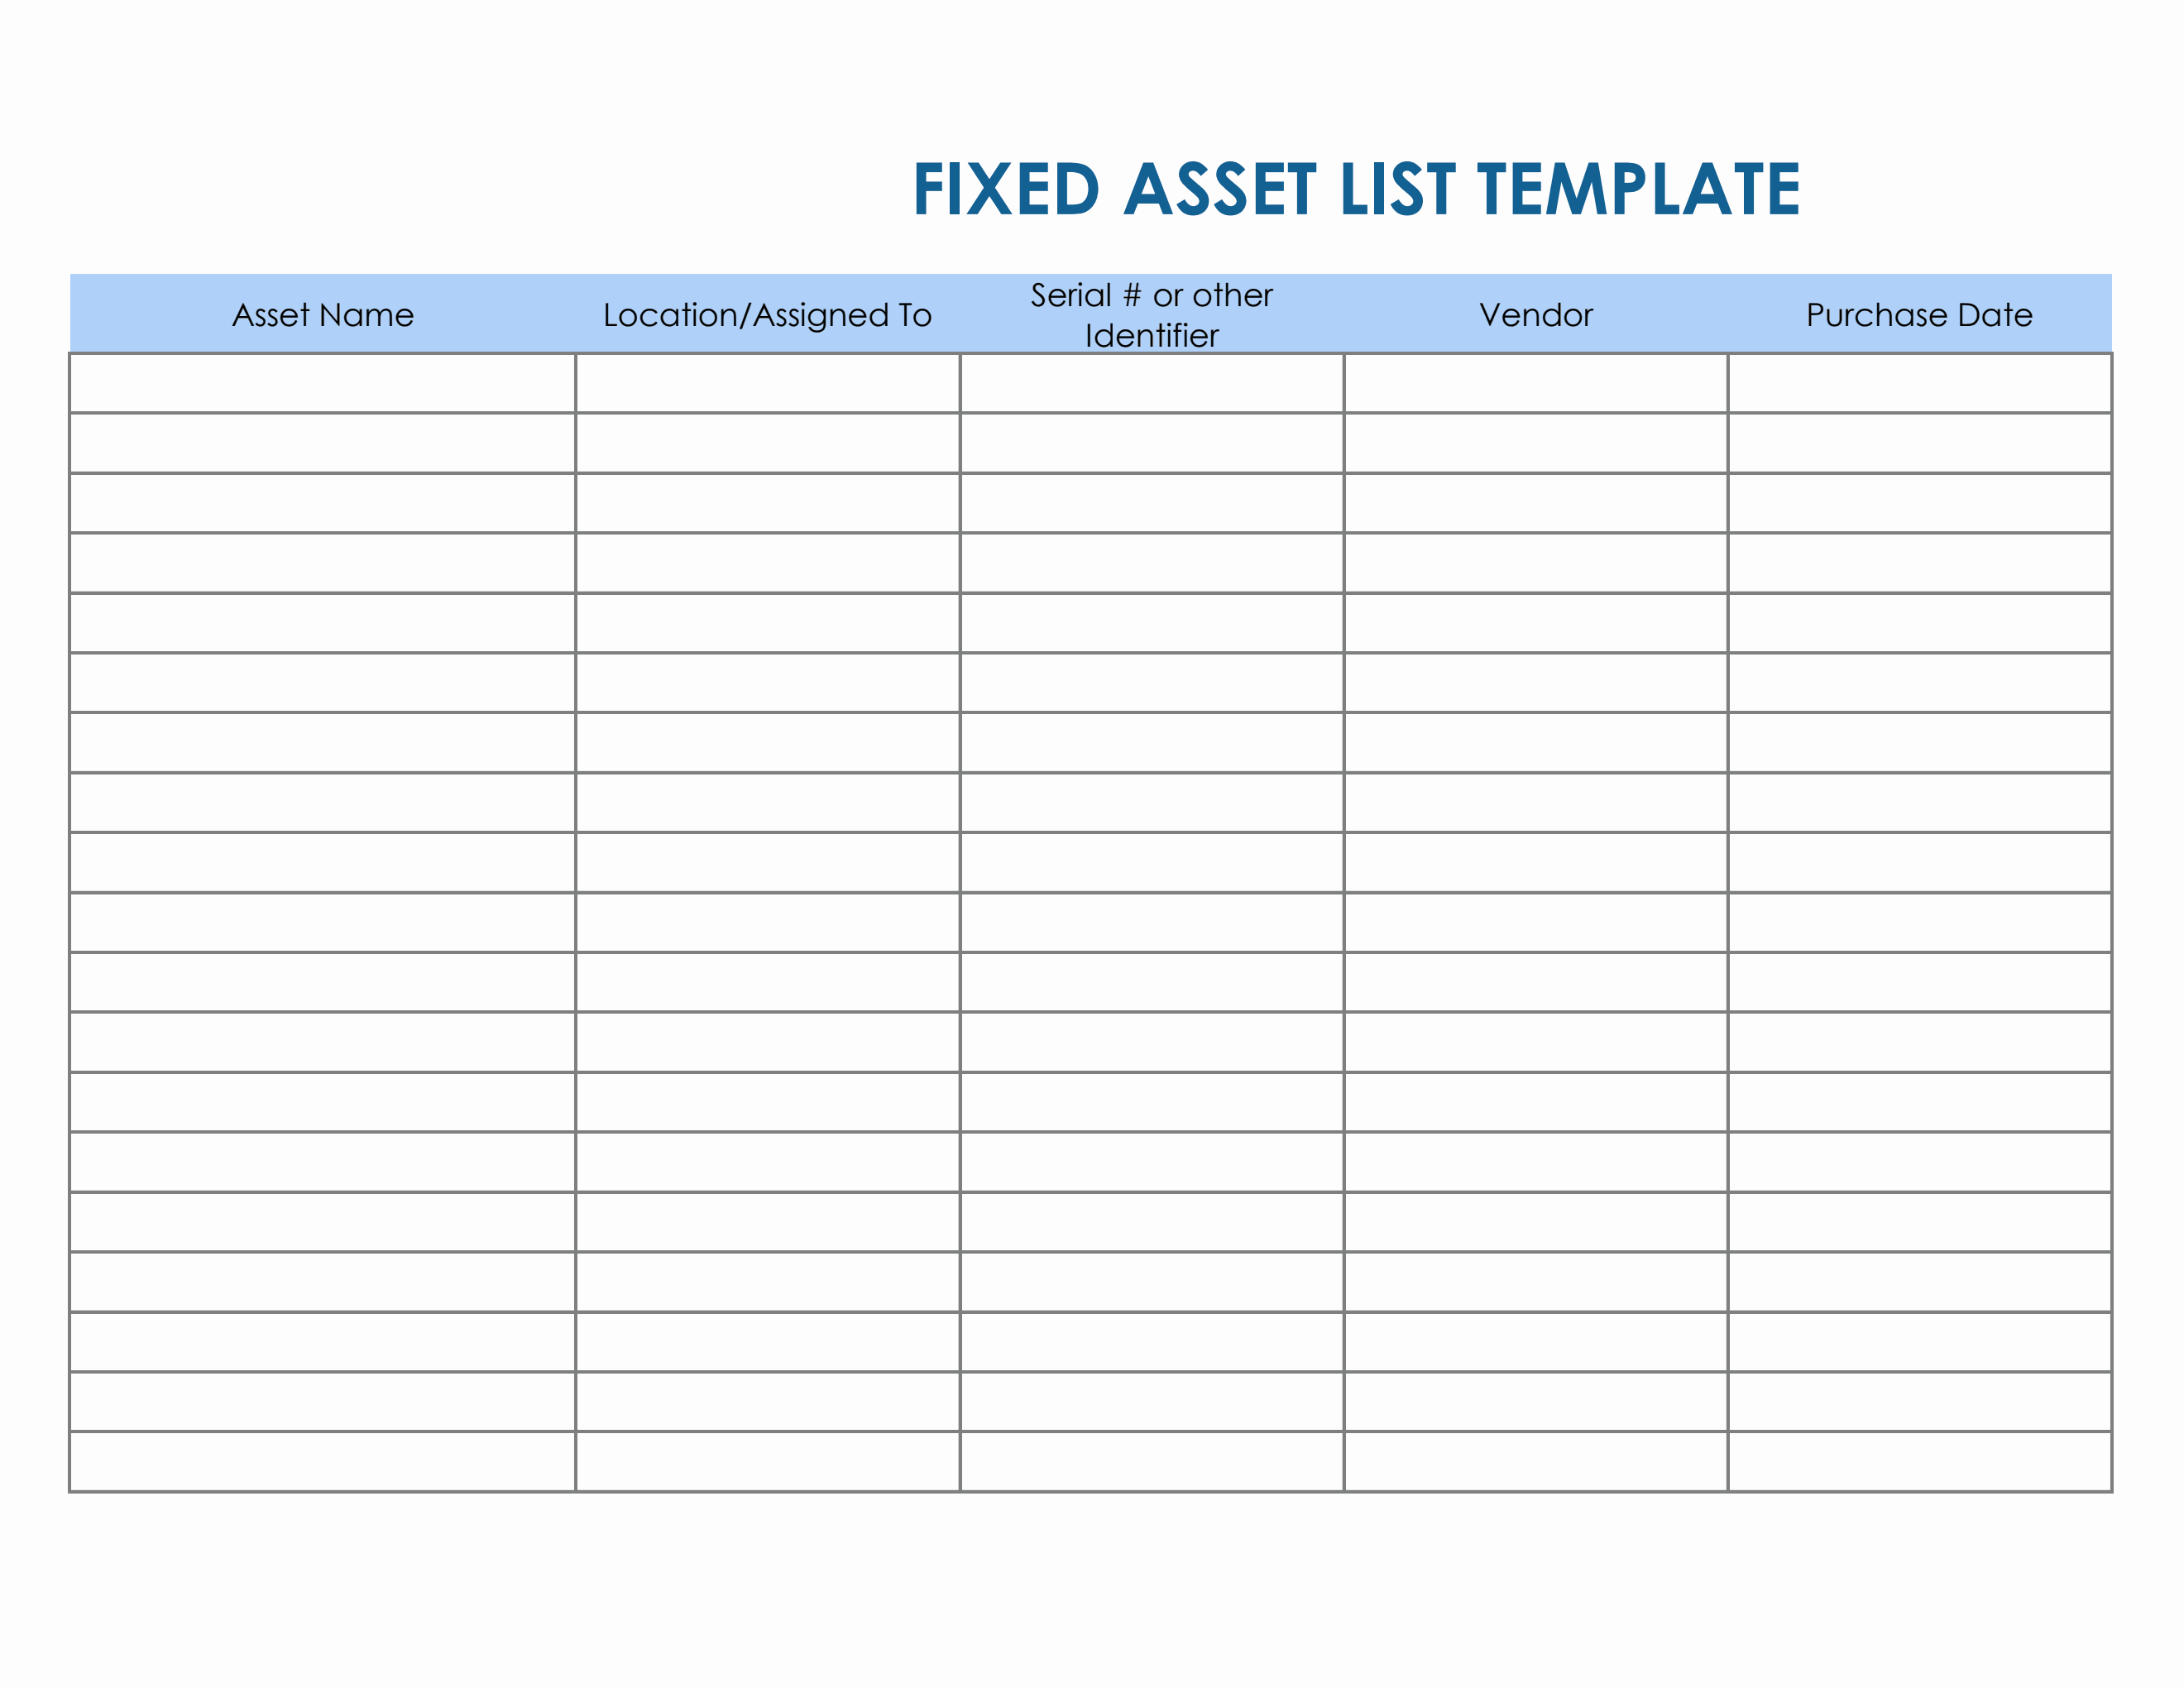 Free Excel Fixed Asset Templates